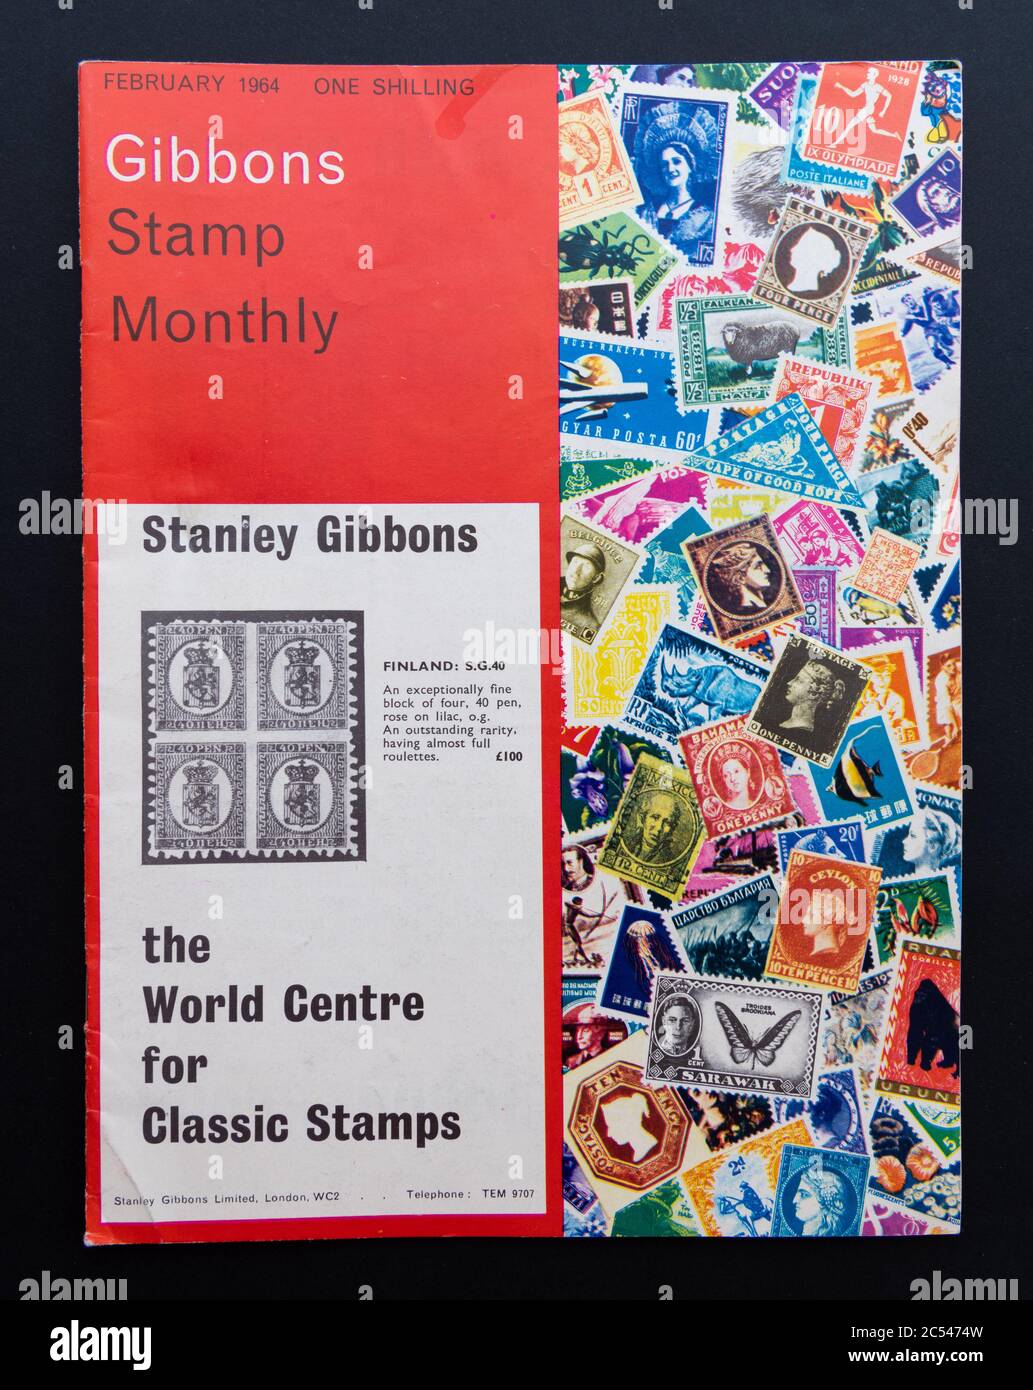 Gibbons Stamp Monthly February 1964 stamp collecting magazine by Stanley Gibbons Stock Photo